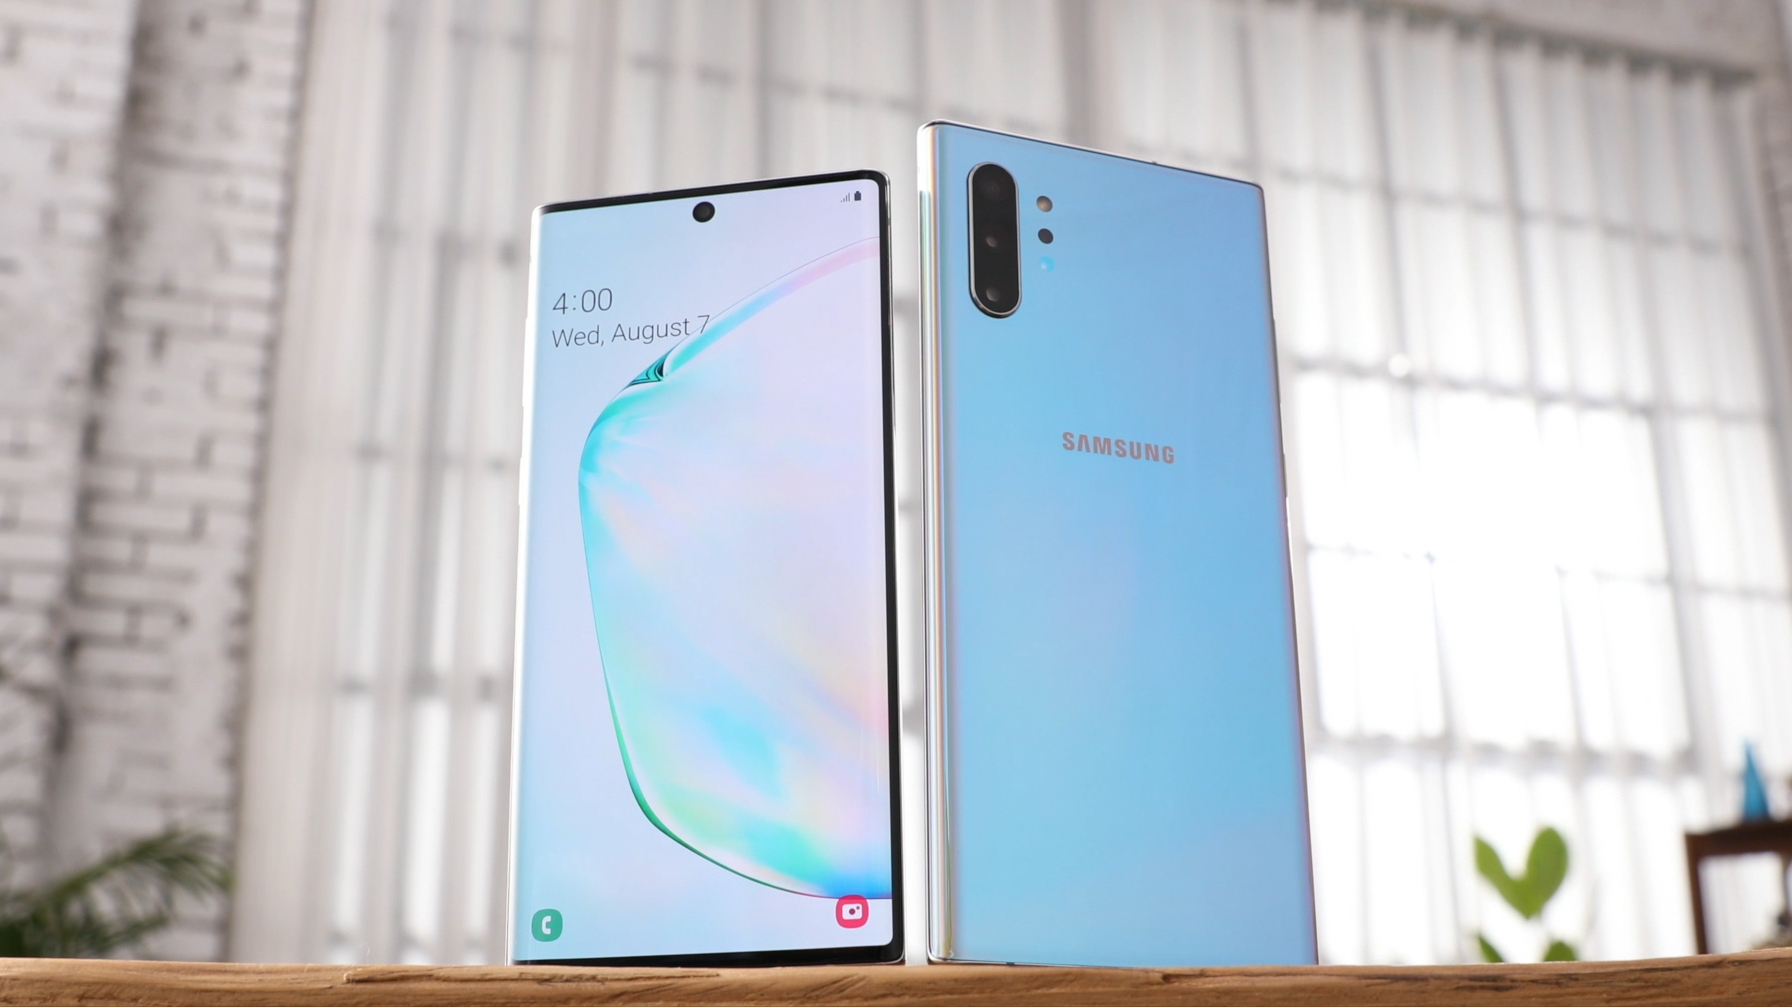 Samsung Galaxy Note10 and Note10+: Price, Specs, Release Date